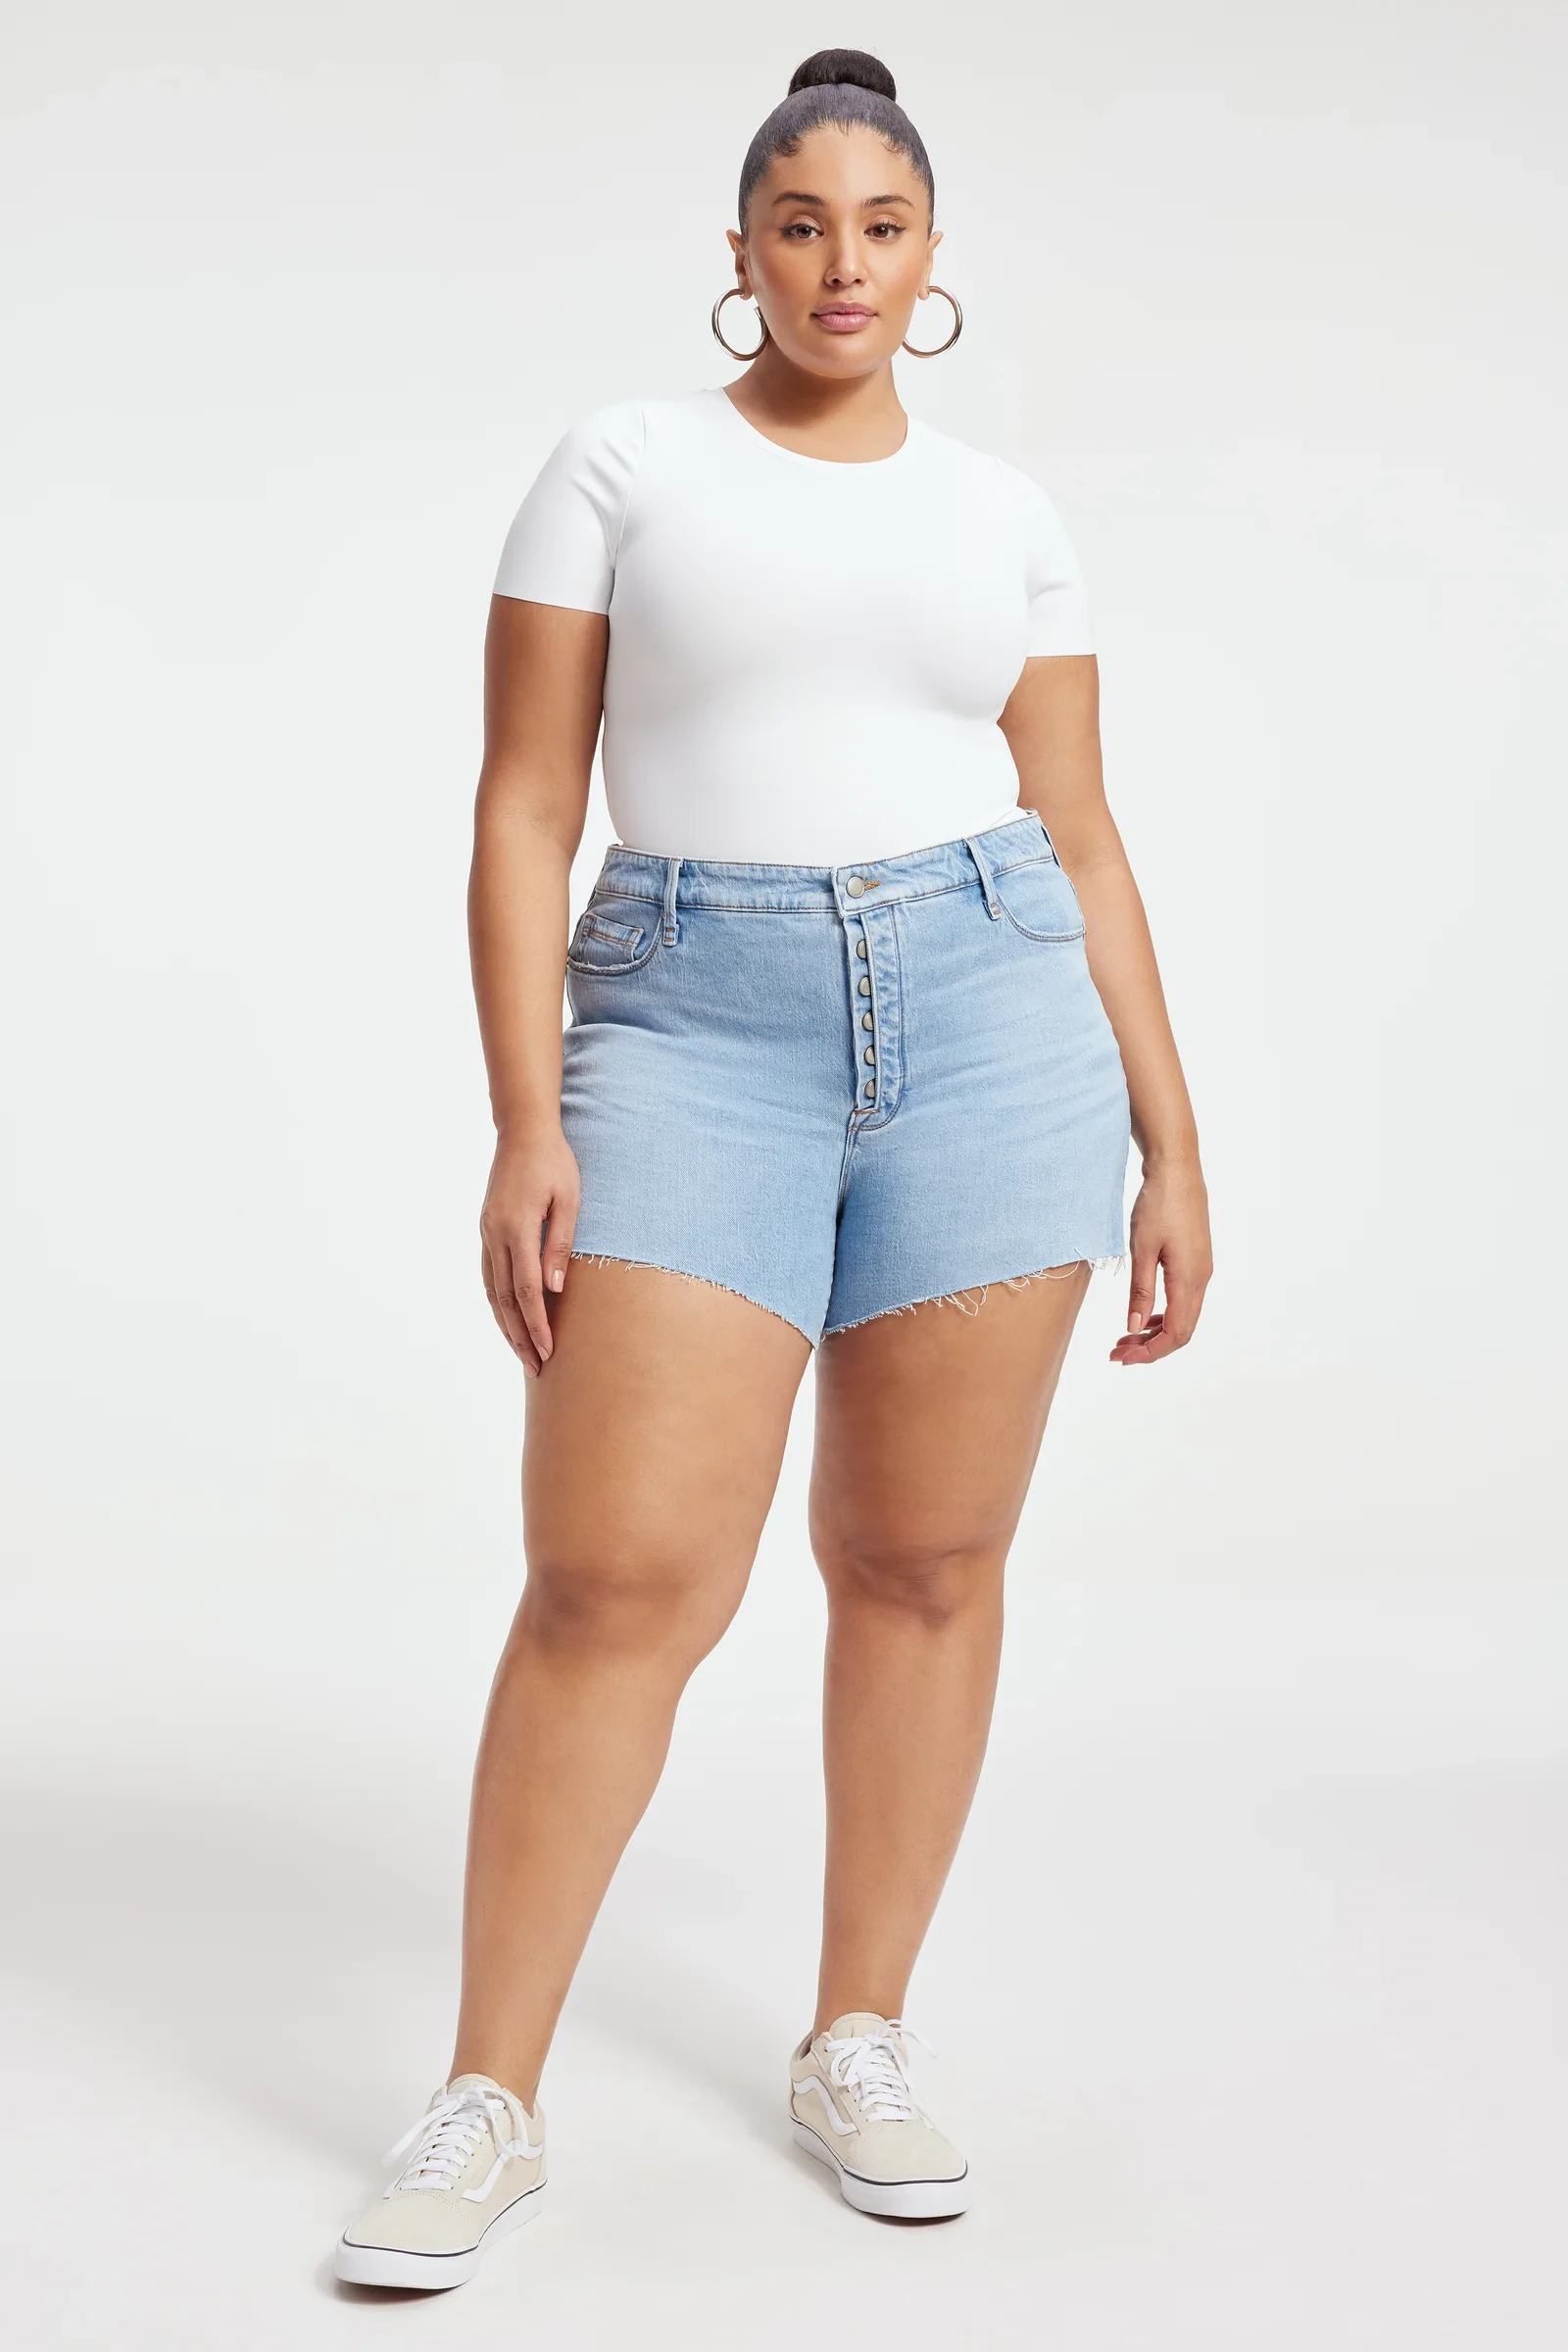 22 Of The Best High-Waisted Denim Shorts For Summertime - Brit + Co